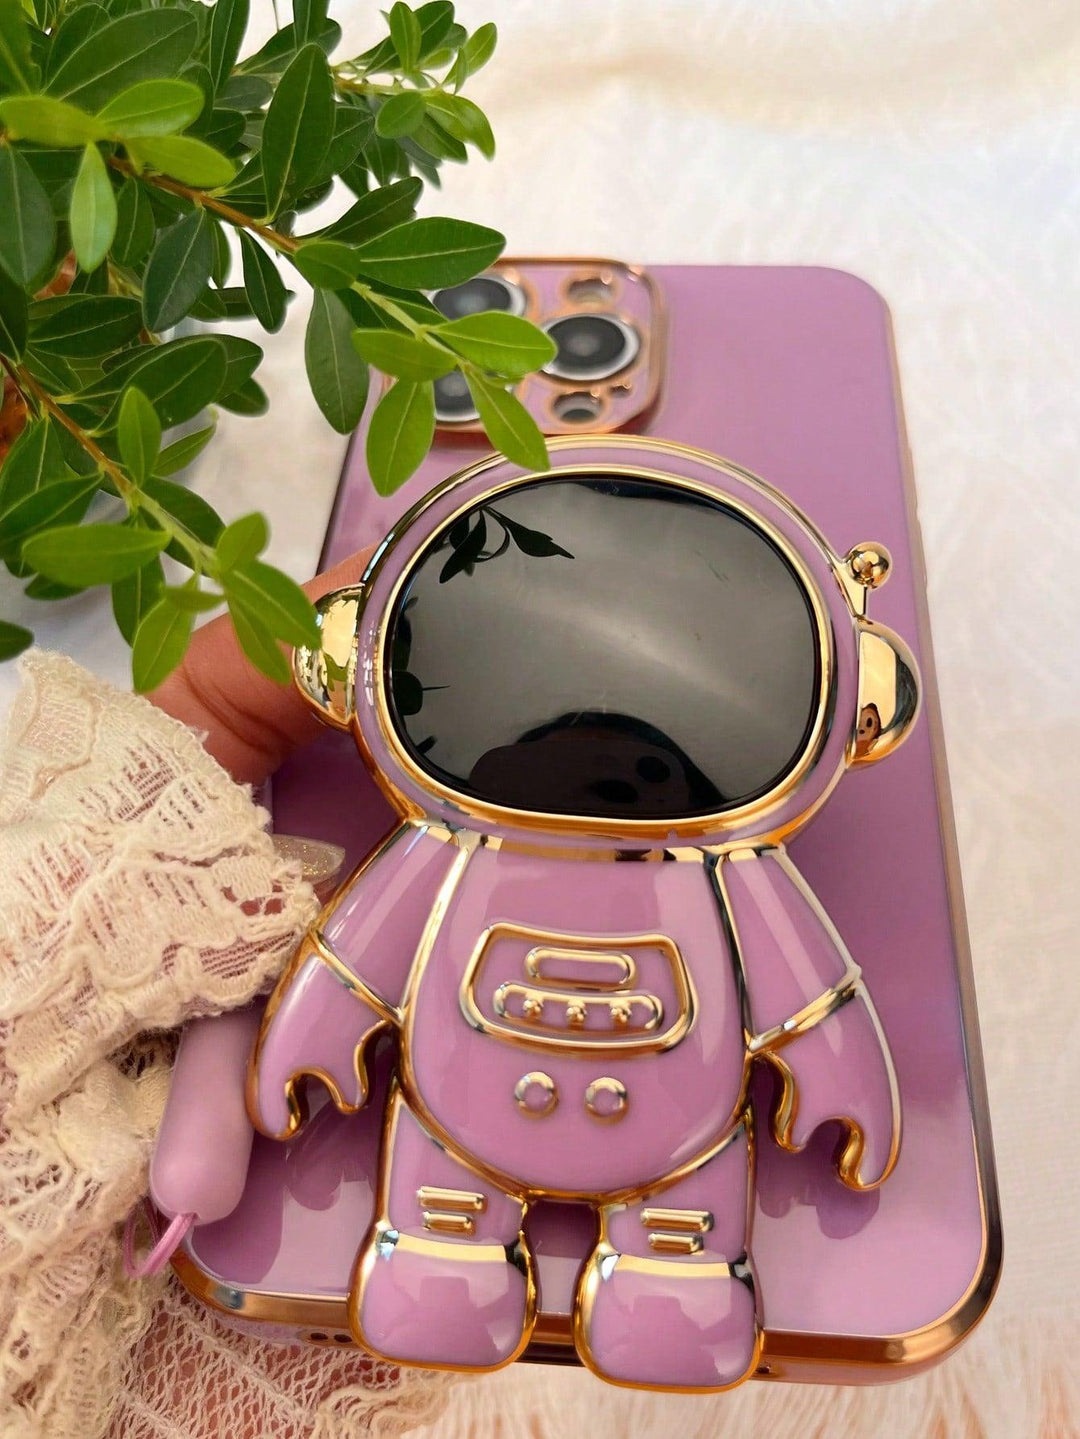 Premium Astronauts Phone Case With Stand - Brand My Case